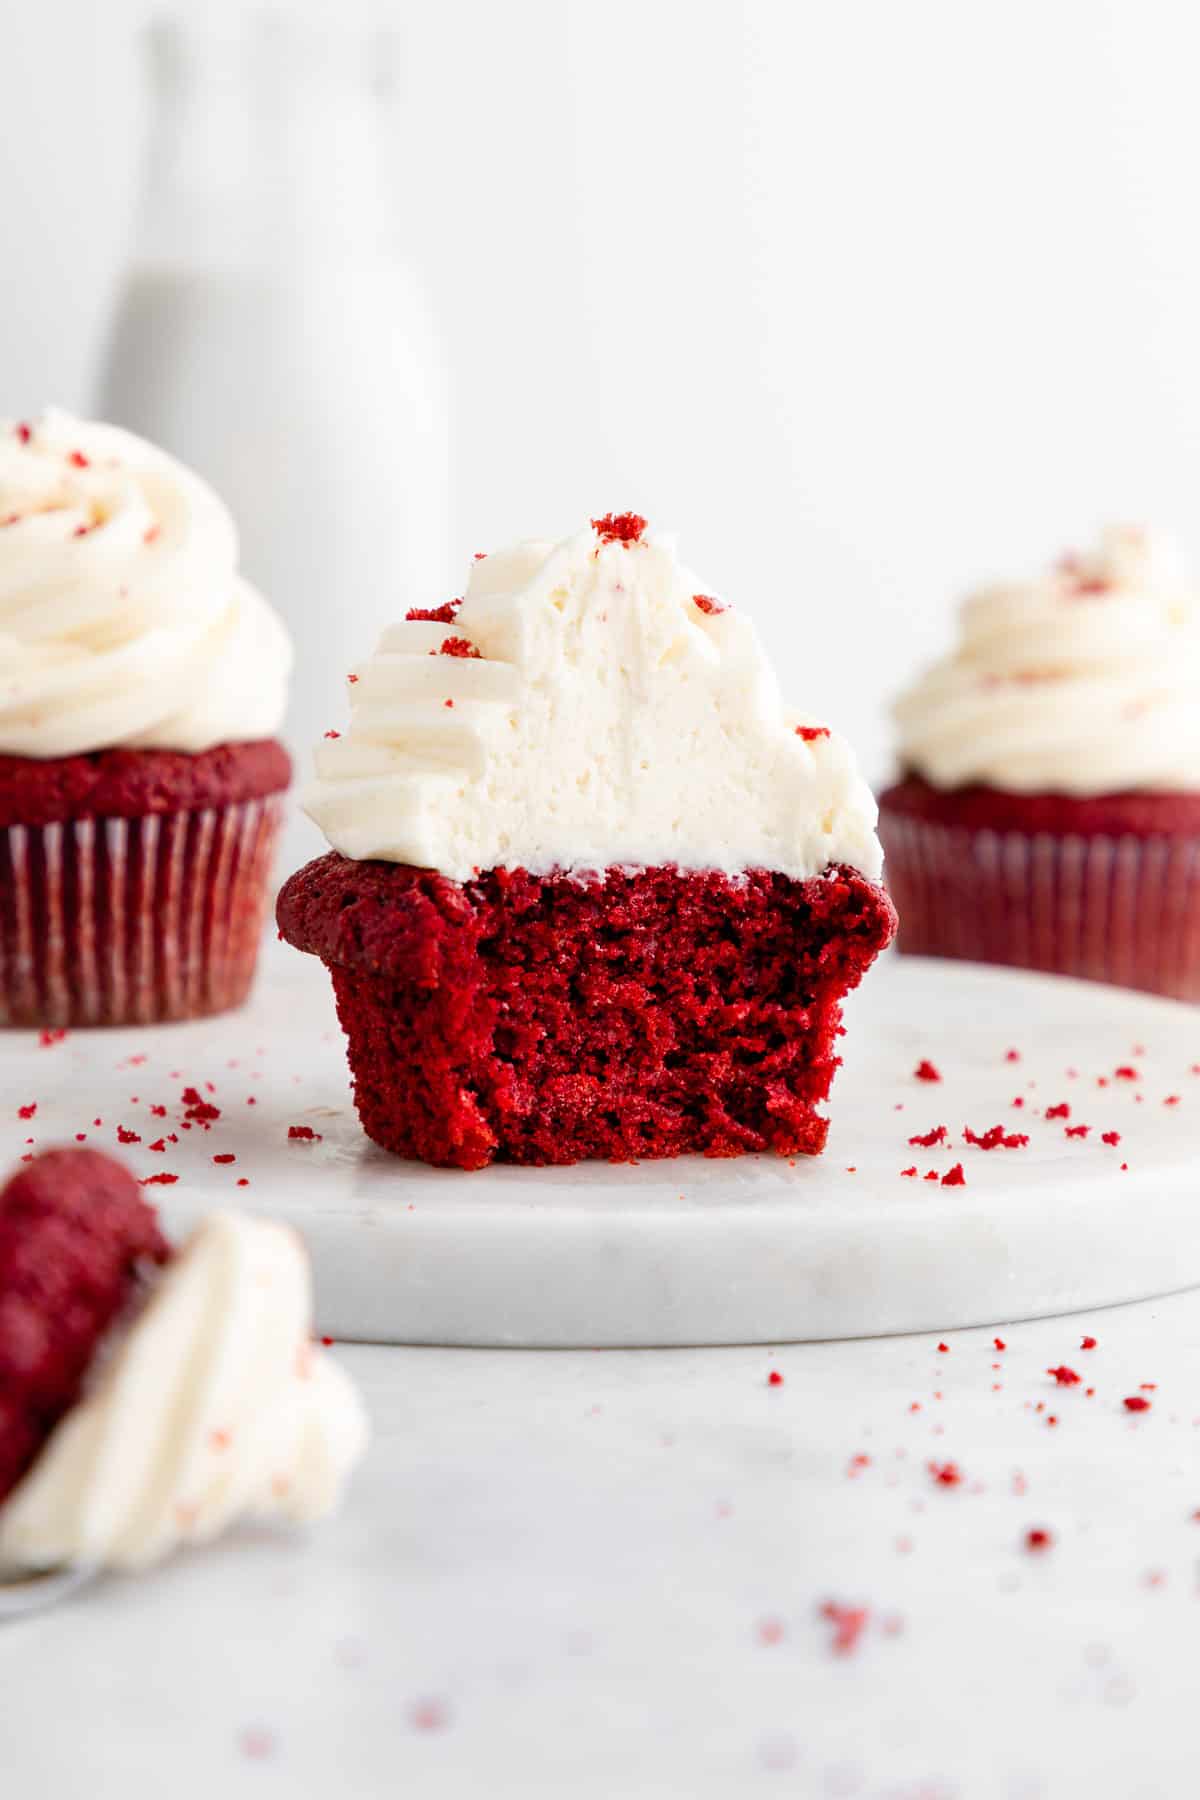 vegan red velvet cupcakes with a bite taken out of the center one